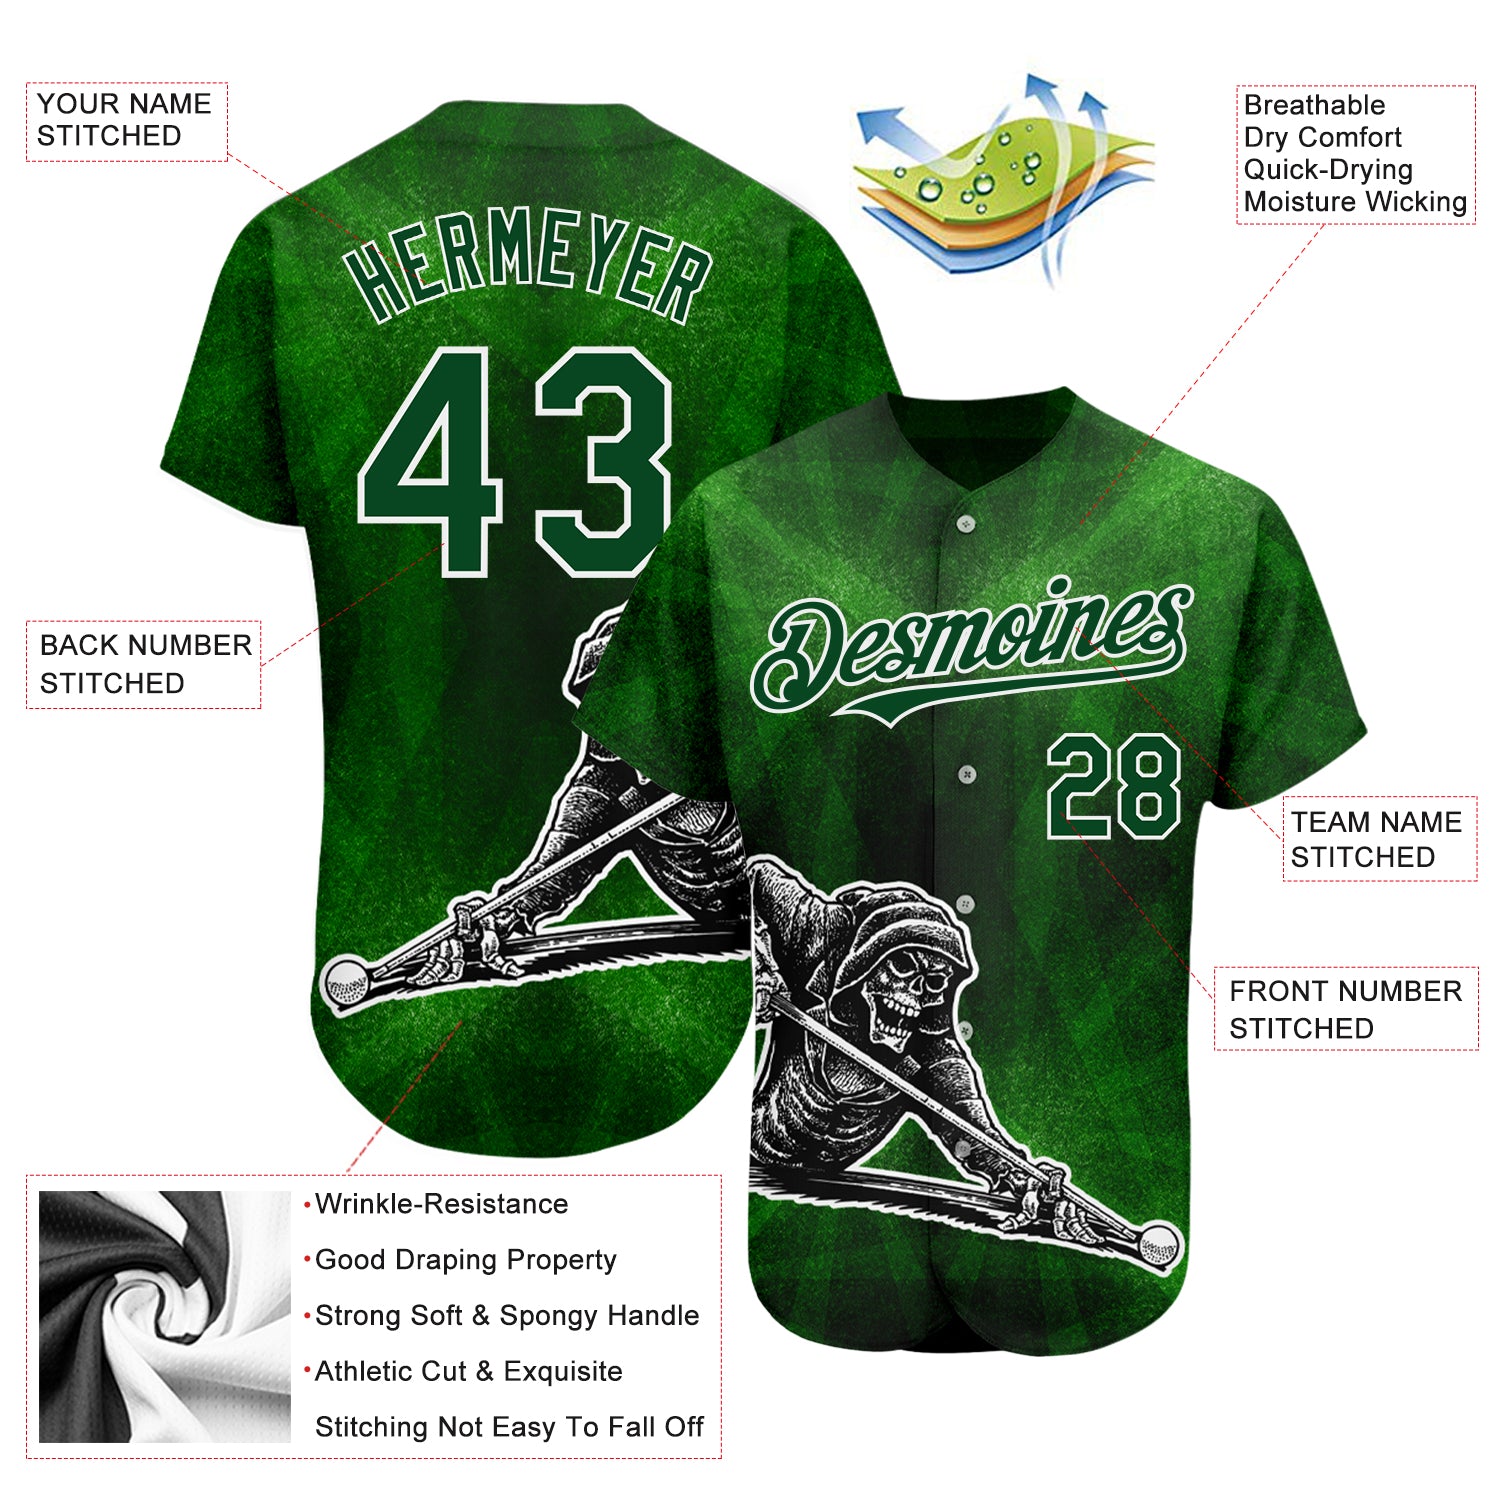 Custom Green White 3D Pattern Design A Skeleton Playing Billiards While Drinking A Beer Authentic Baseball Jersey